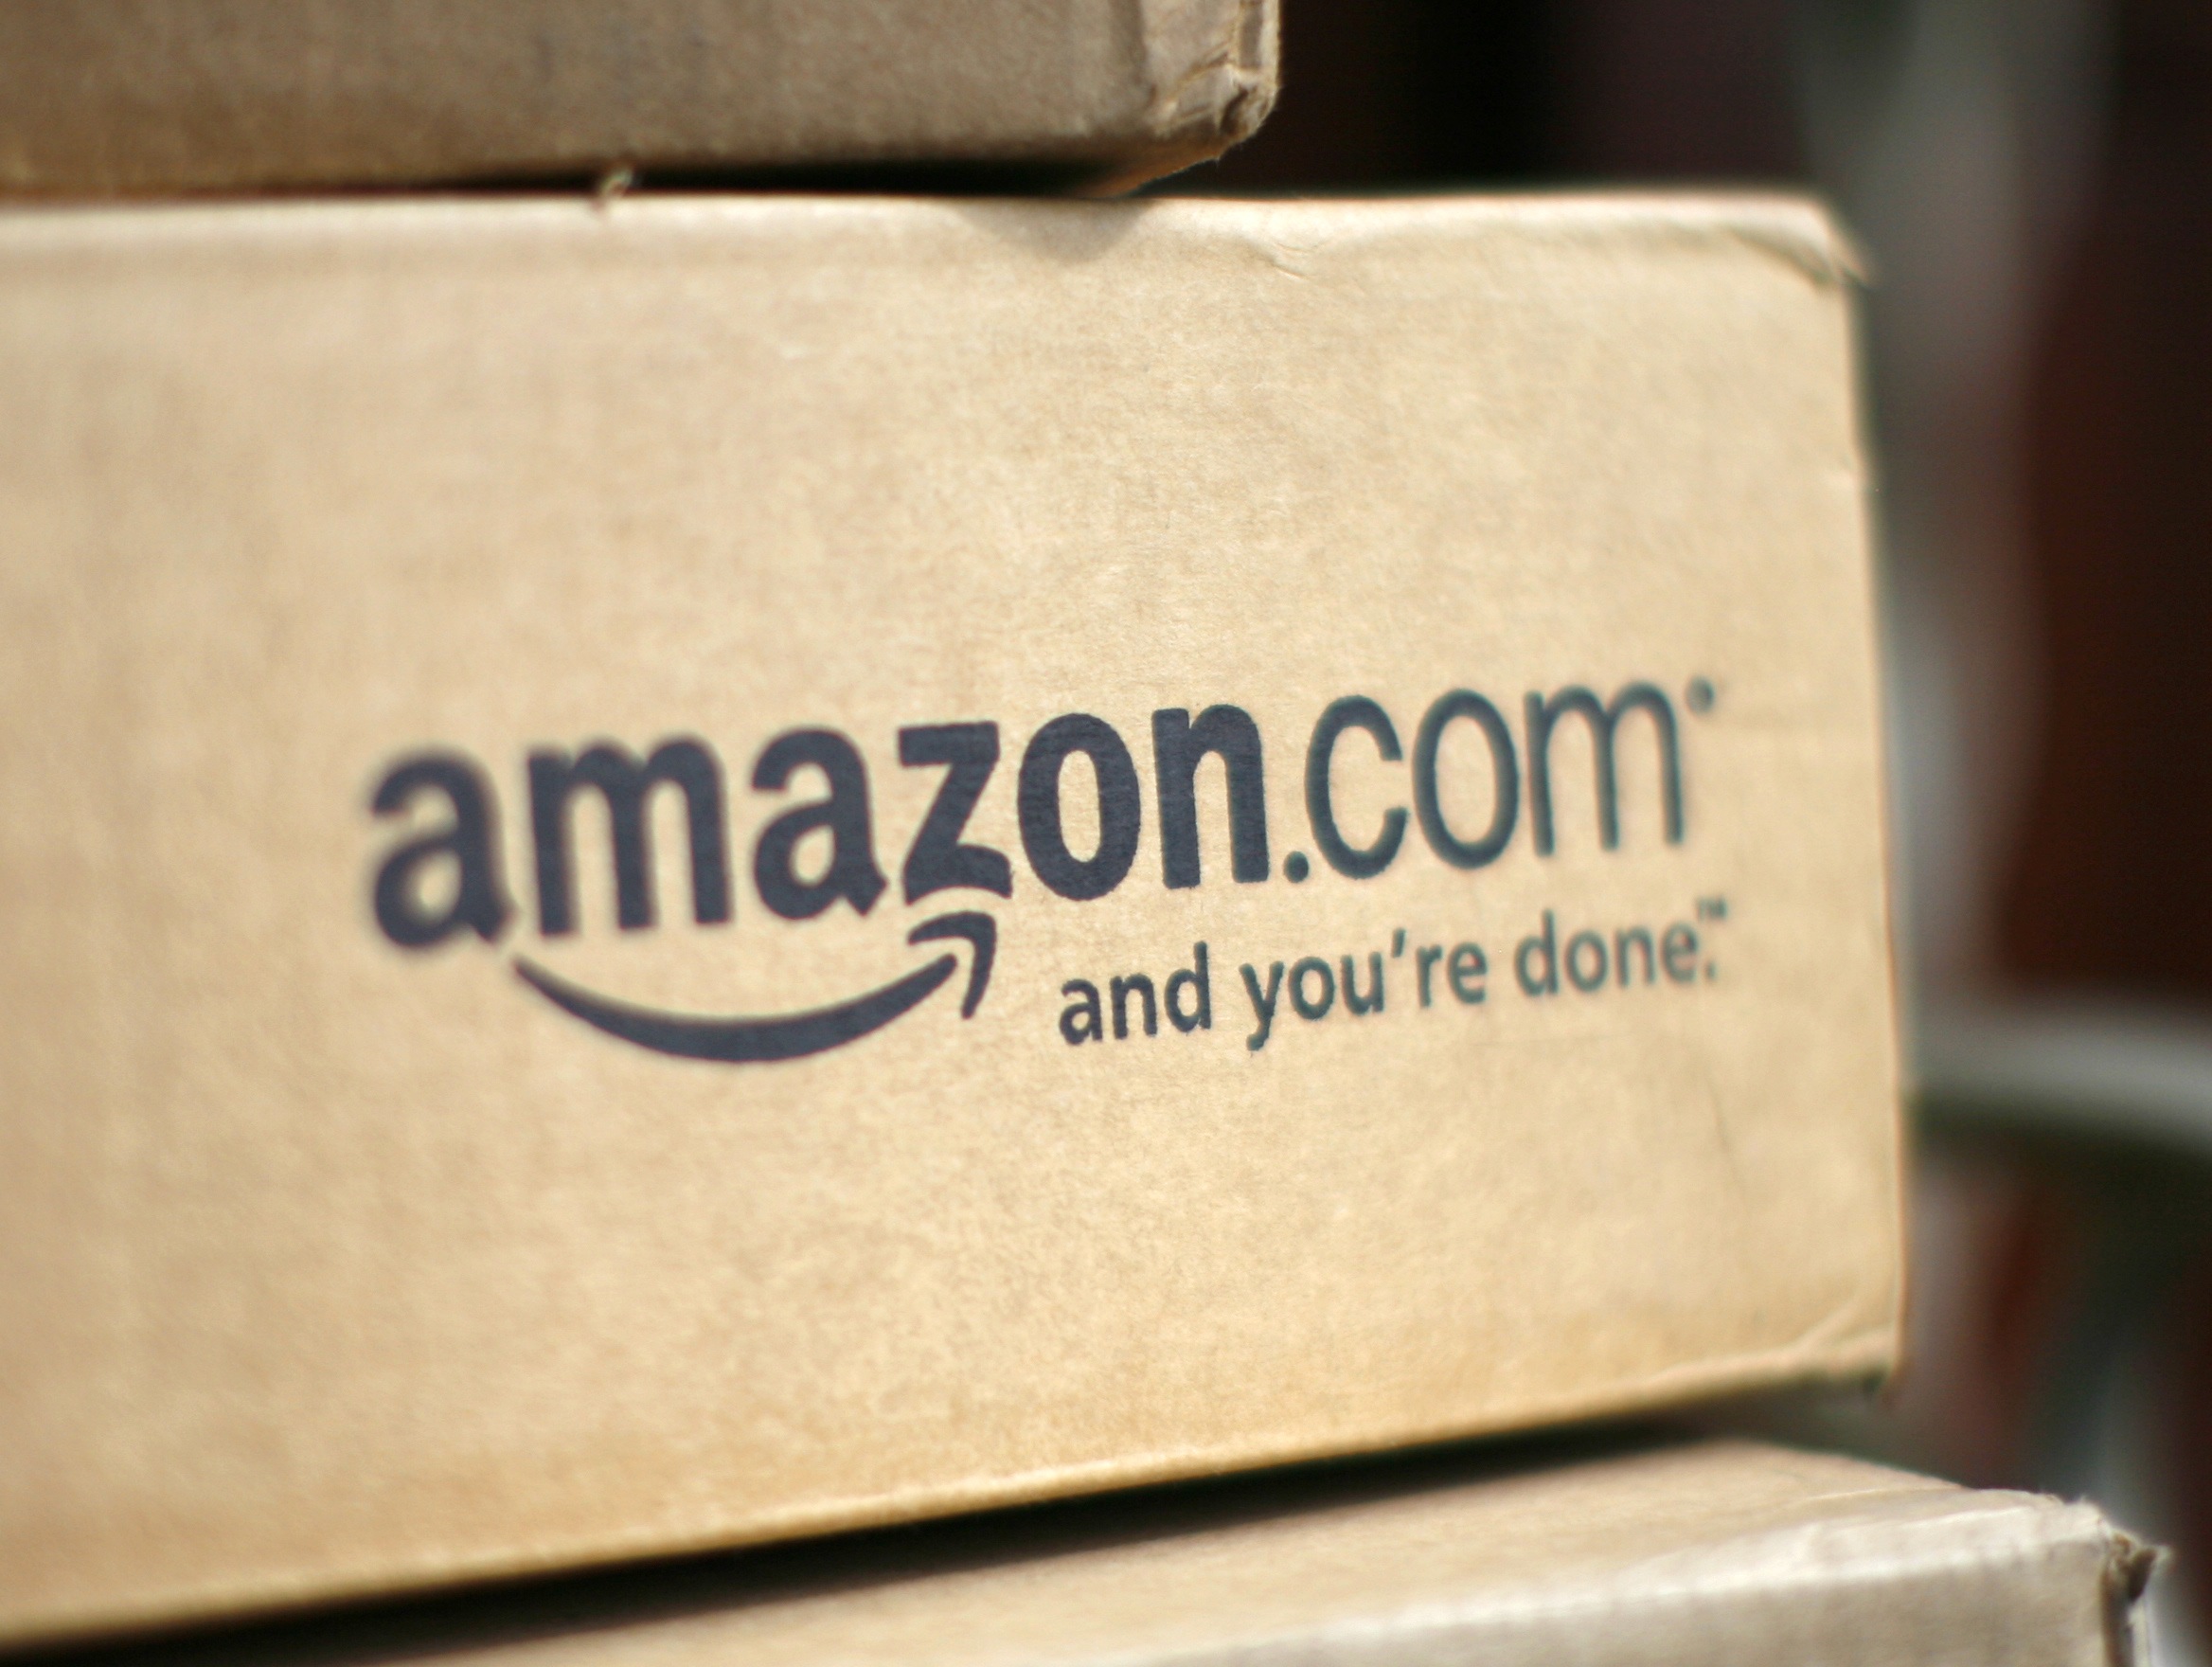 File of a box from Amazon.com is pictured on the porch of a house in Golden, Colorado